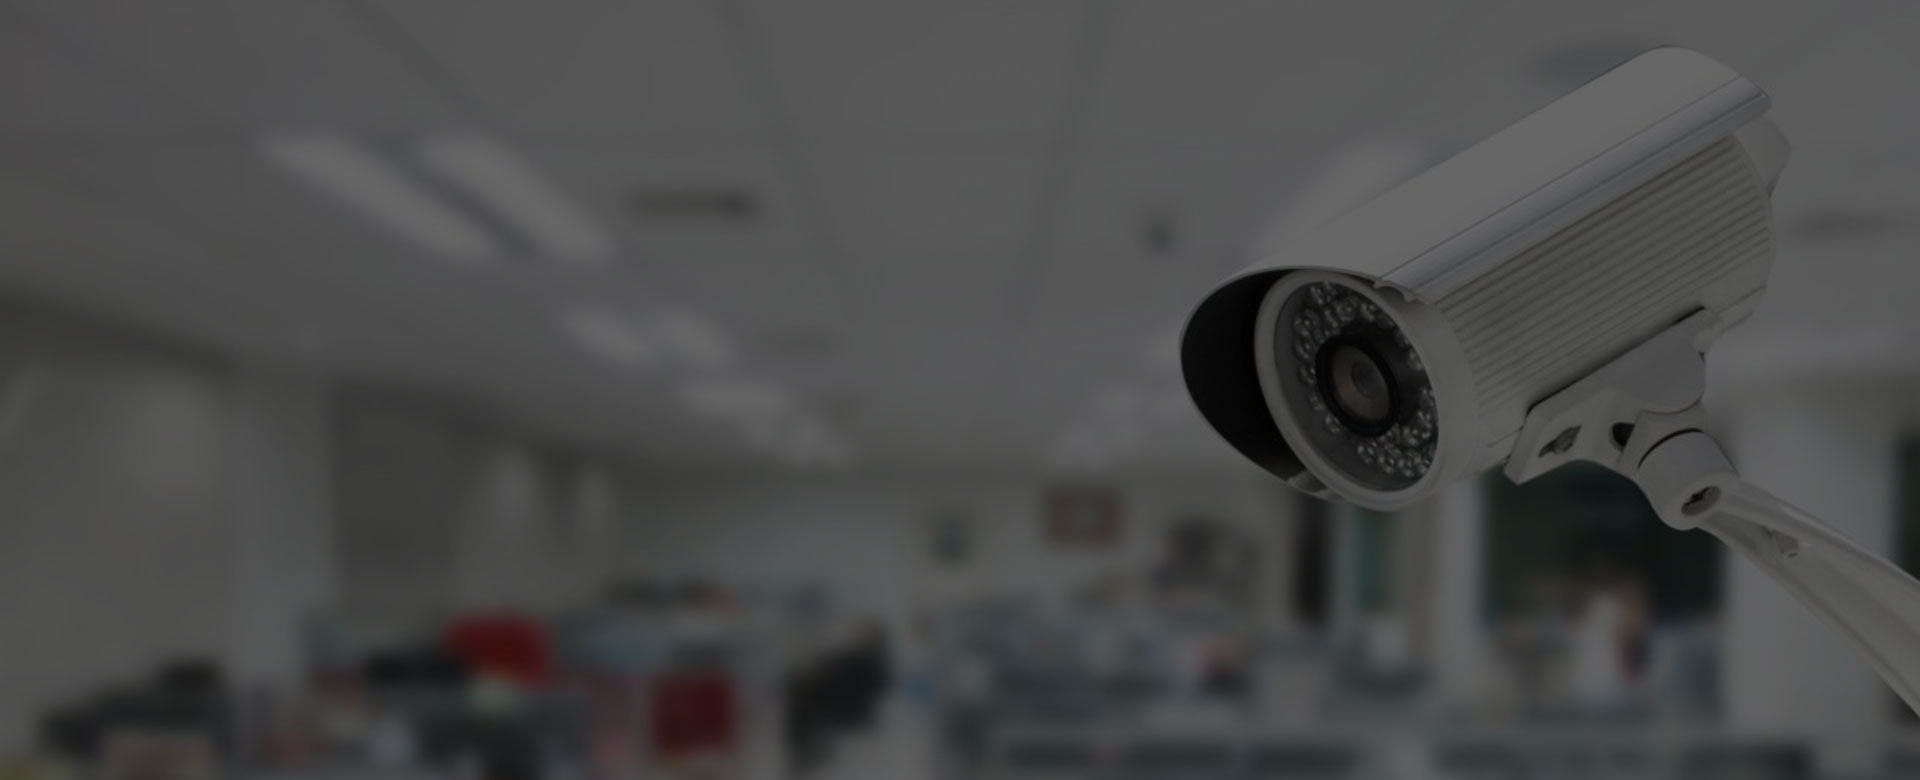 RESIDENTIAL AND COMMERCIAL CCTV